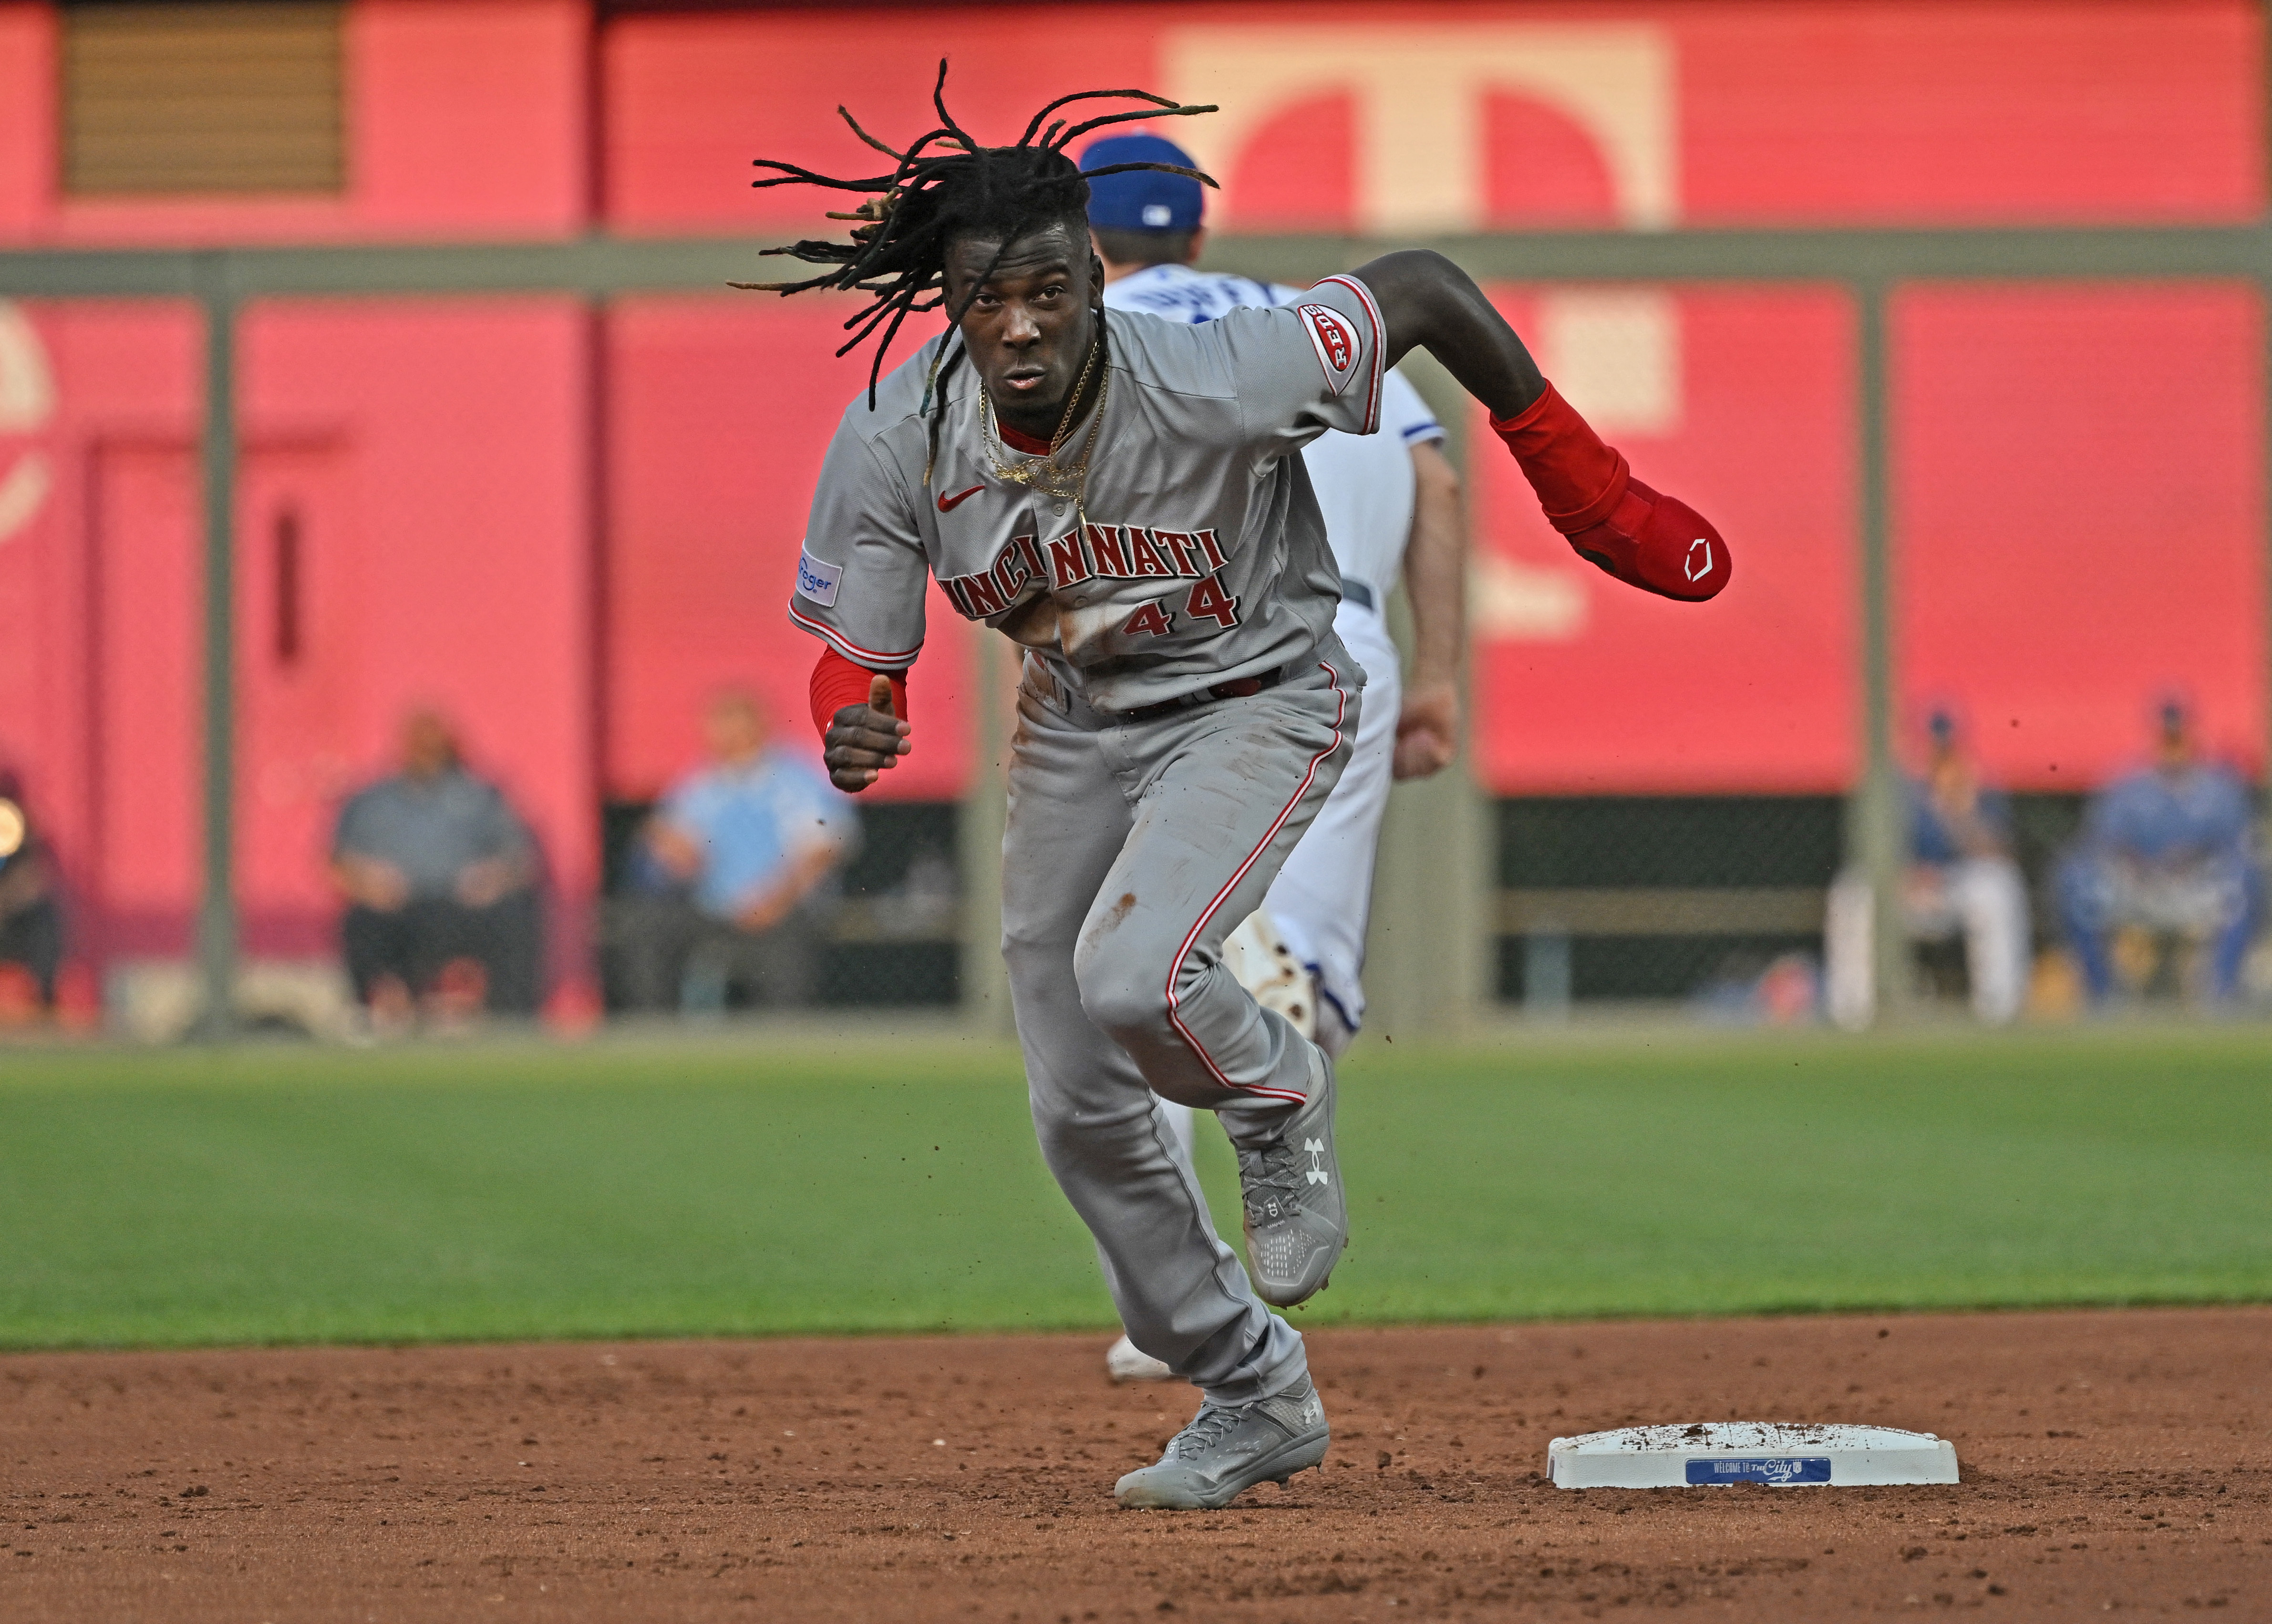 Big second inning leads Reds over reeling Royals